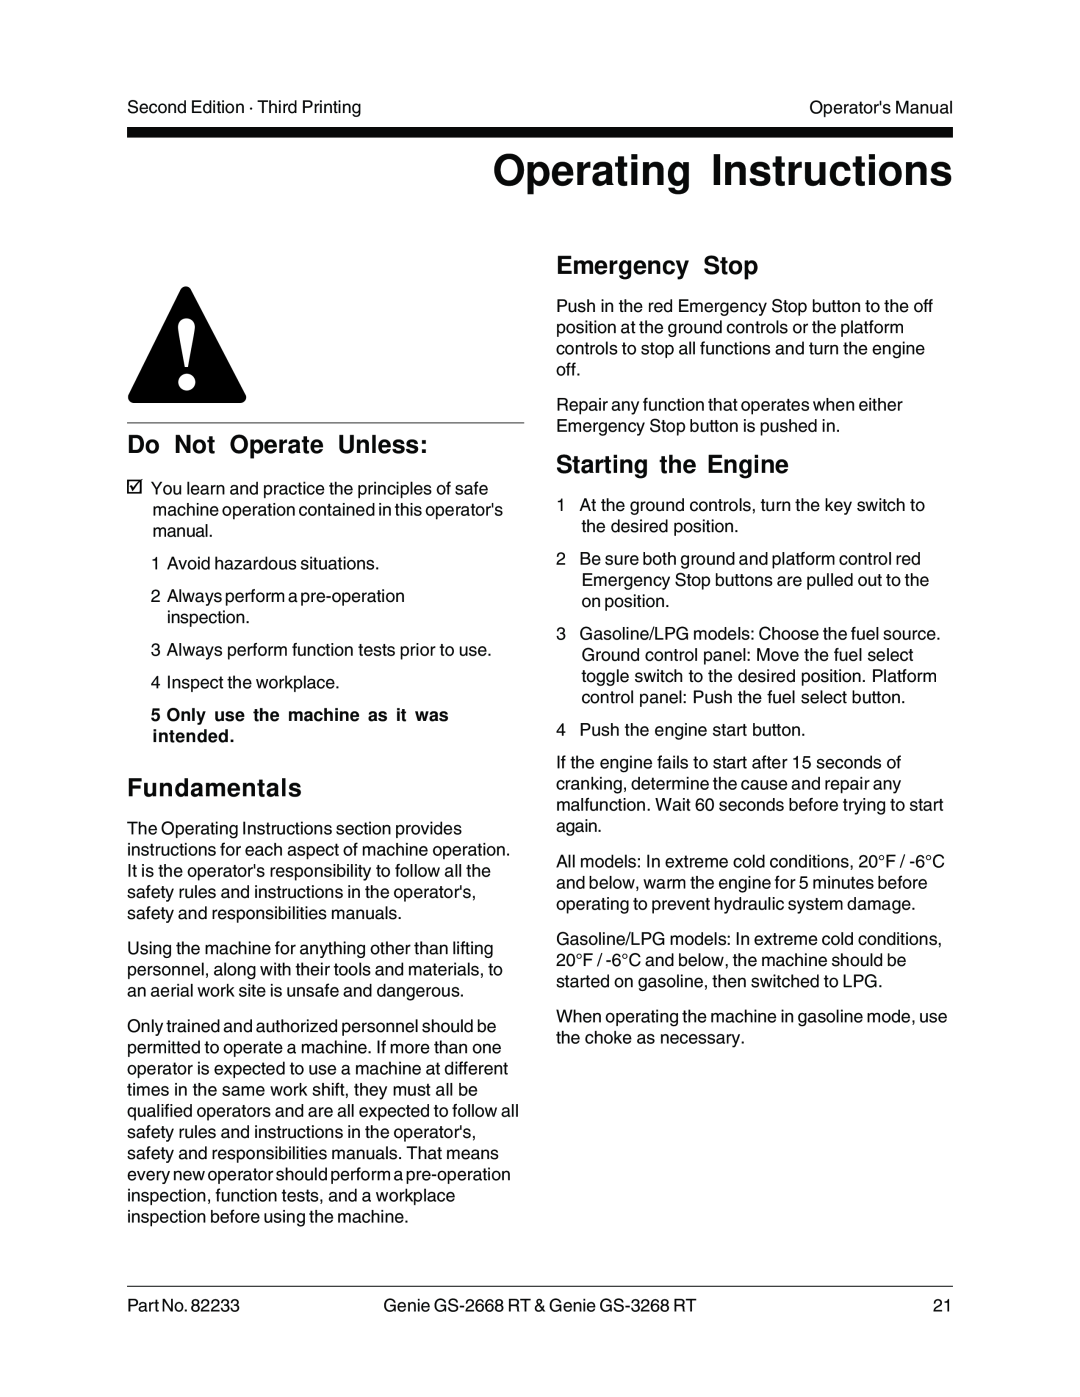 Genie GS-3268 RT Operating Instructions, Emergency Stop, Starting the Engine, Only use the machine as it was intended 